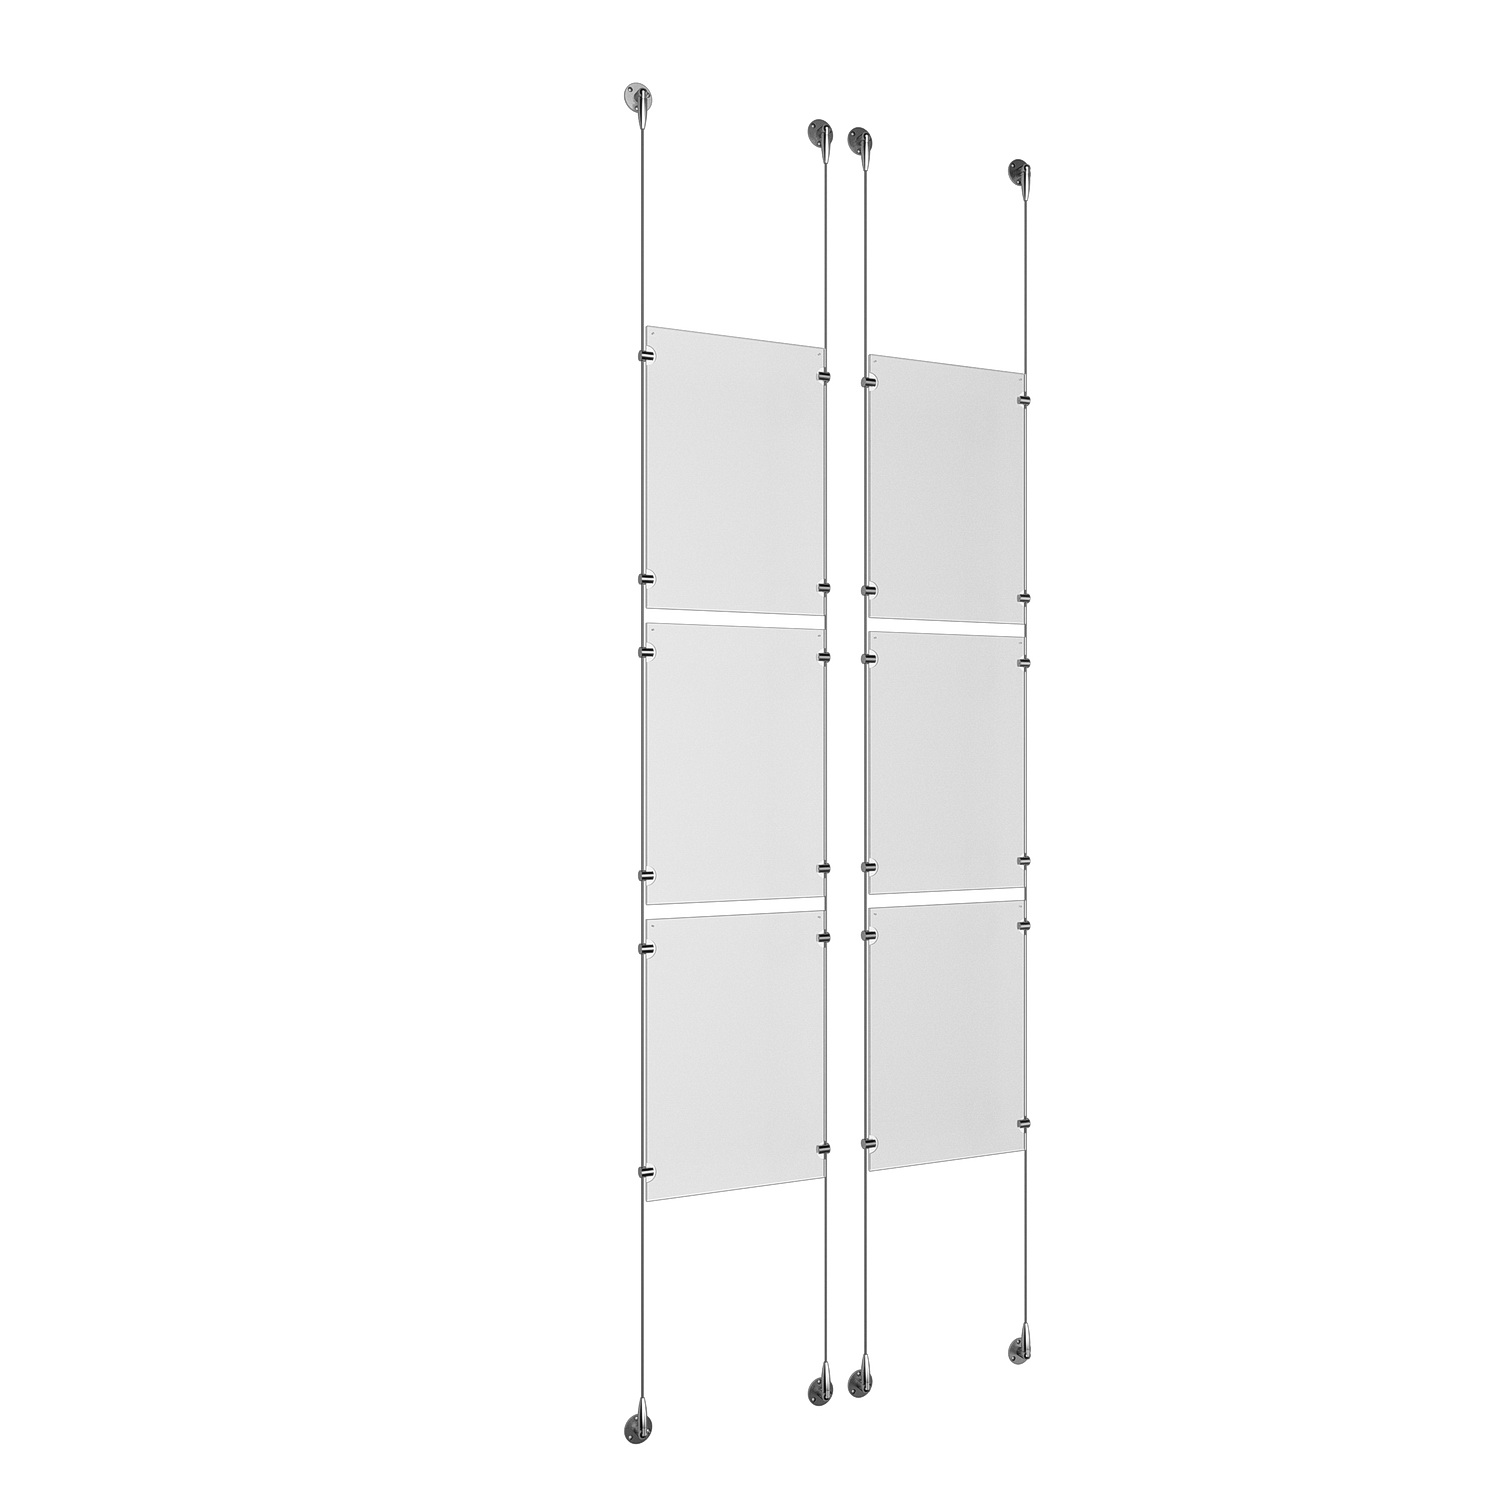 (6) 11'' Width x 17'' Height Clear Acrylic Frame & (4) Aluminum Clear Anodized Adjustable Angle Signature 1/8'' Diameter Cable Systems with (24) Single-Sided Panel Grippers